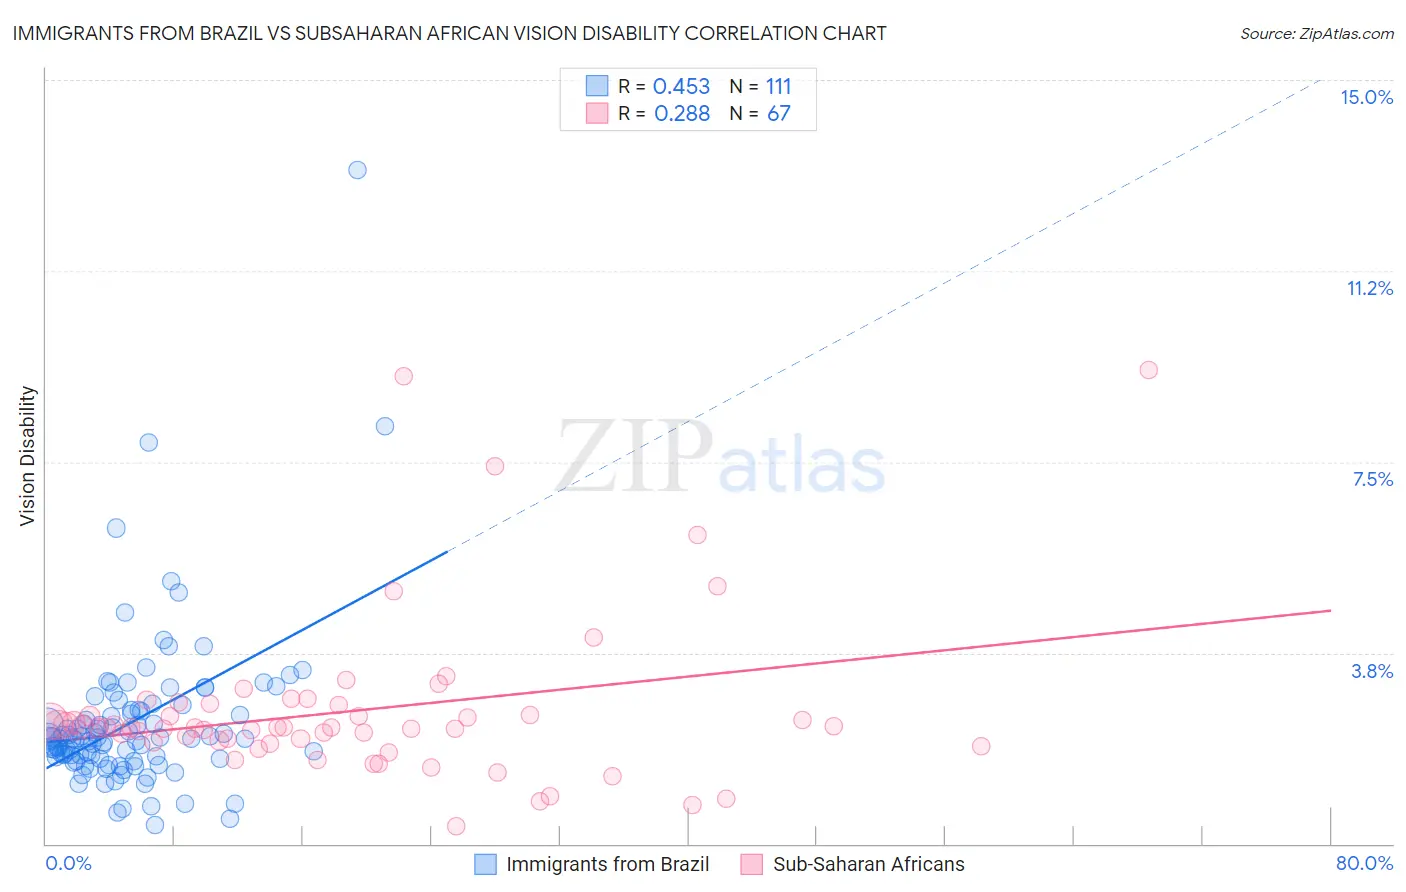 Immigrants from Brazil vs Subsaharan African Vision Disability